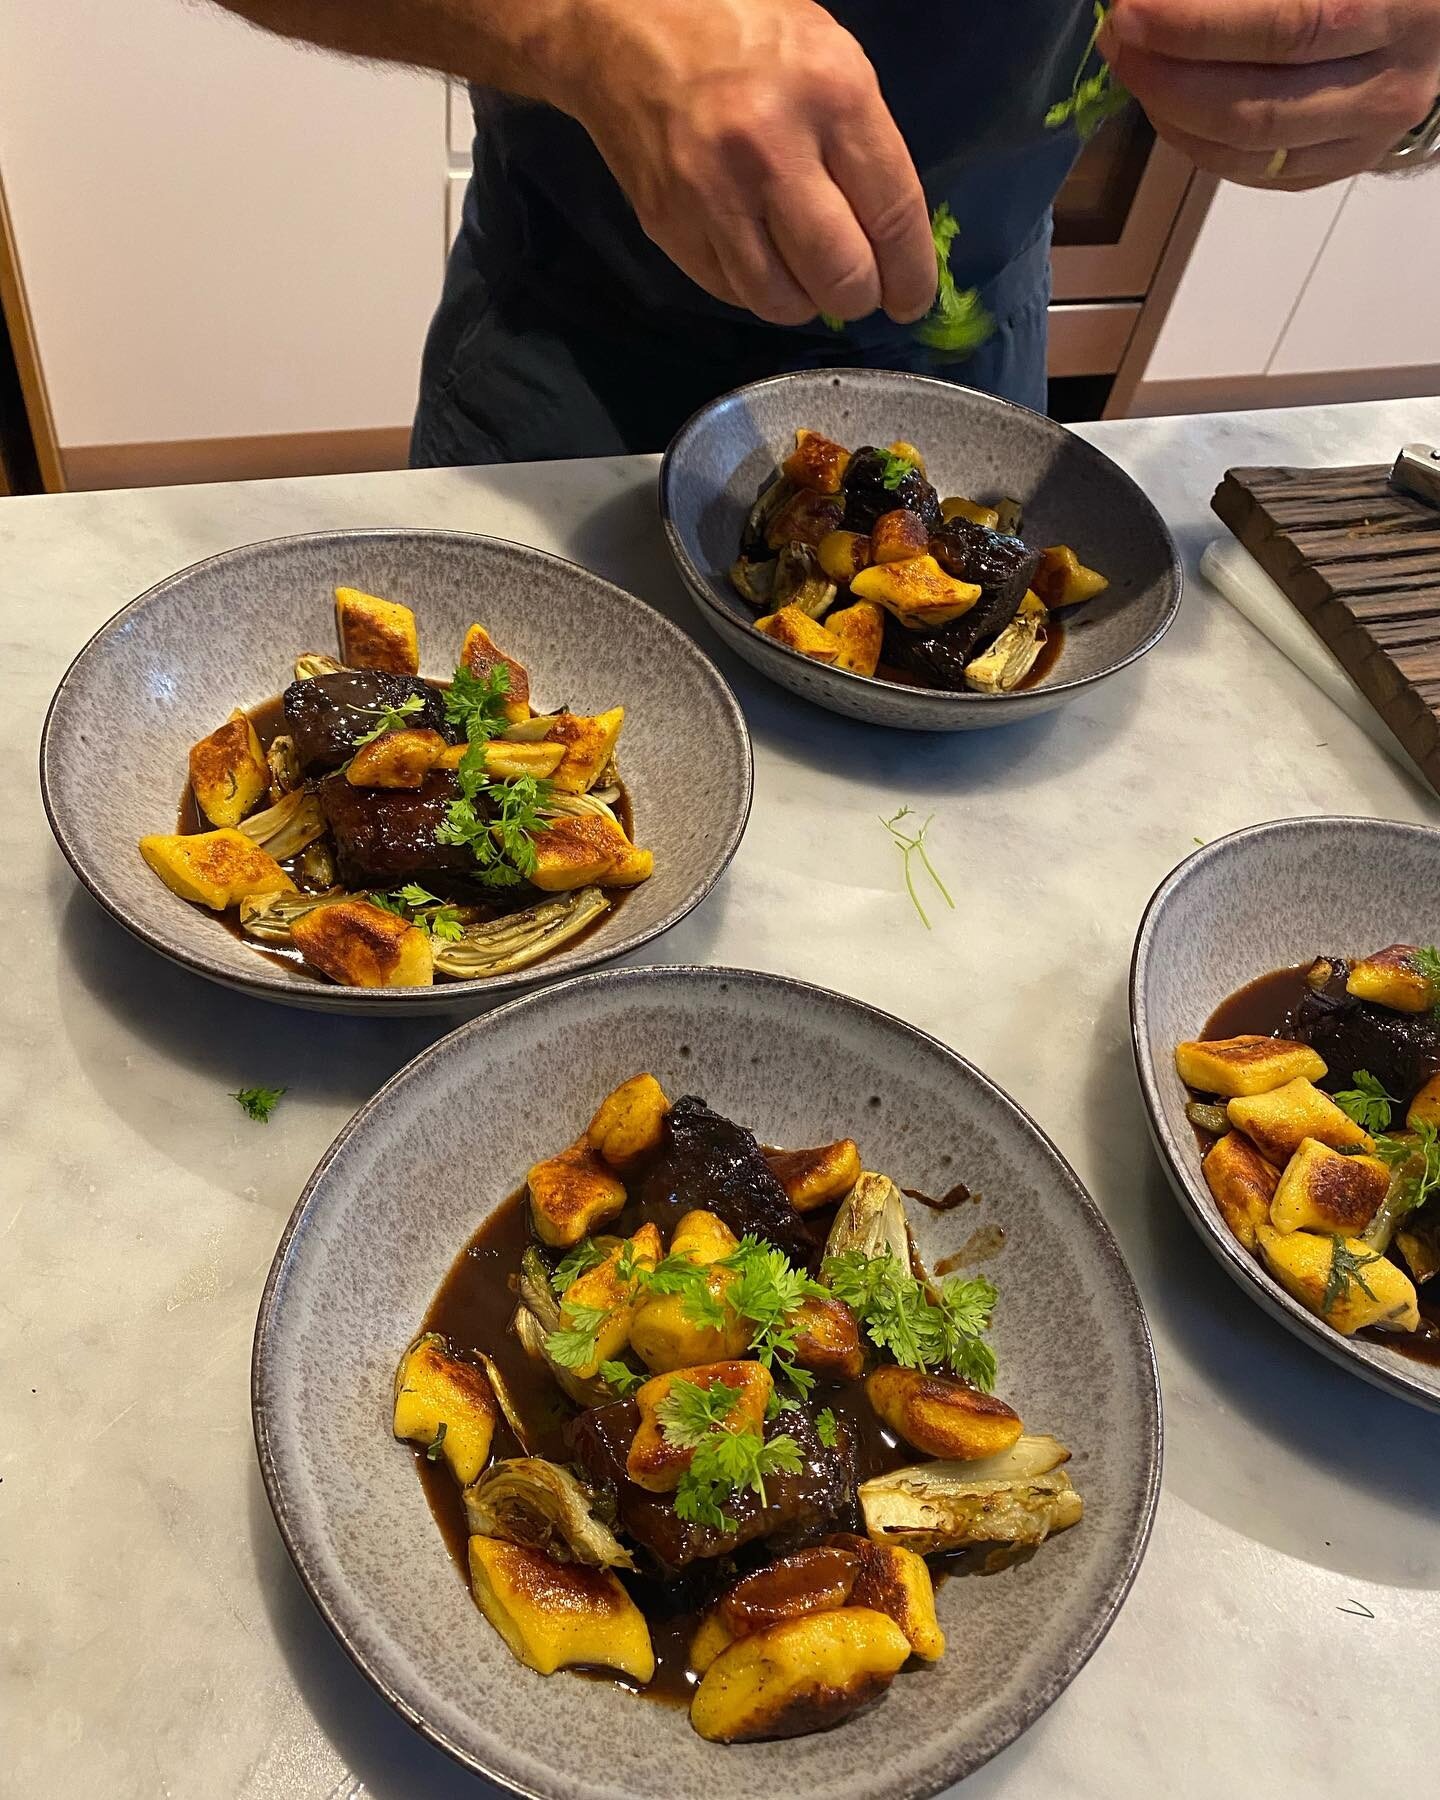 Small gathering of 3 generations enjoying a @maisonbypatrice meal last night - Glazed beef short ribs, pumpkin gnocchi, roasted fennel &amp; sage 🤌🏾